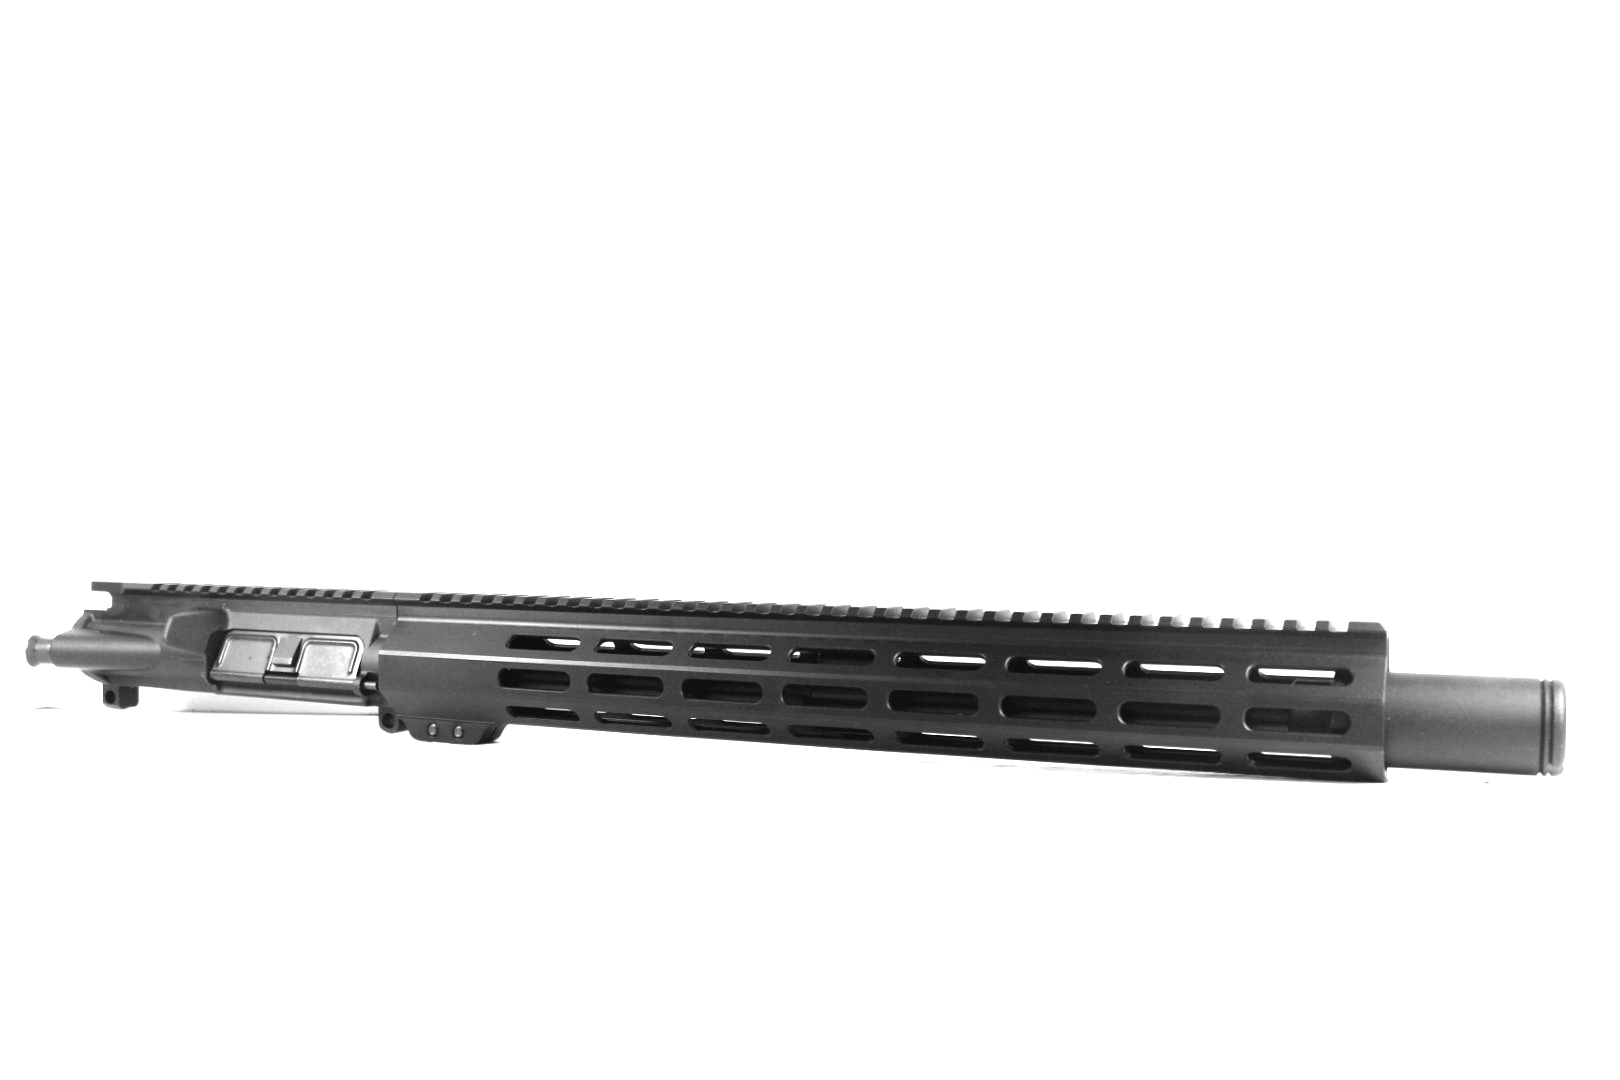 14.5 inch AR-15 5.56 NATO (shoots 223/5.56) Carbine Length Melonite Upper with Flash Can